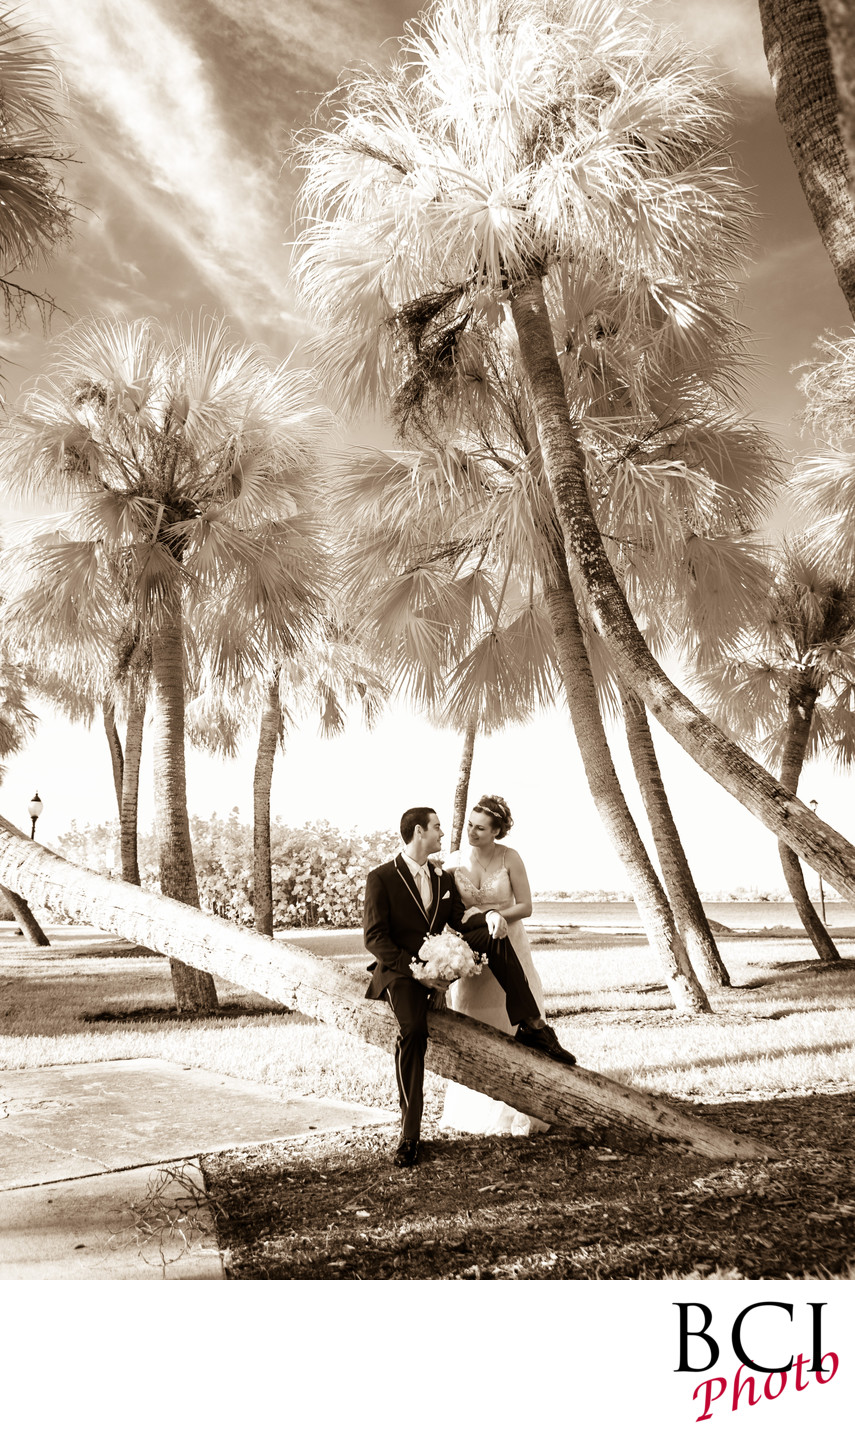 South Florida's best wedding photography company